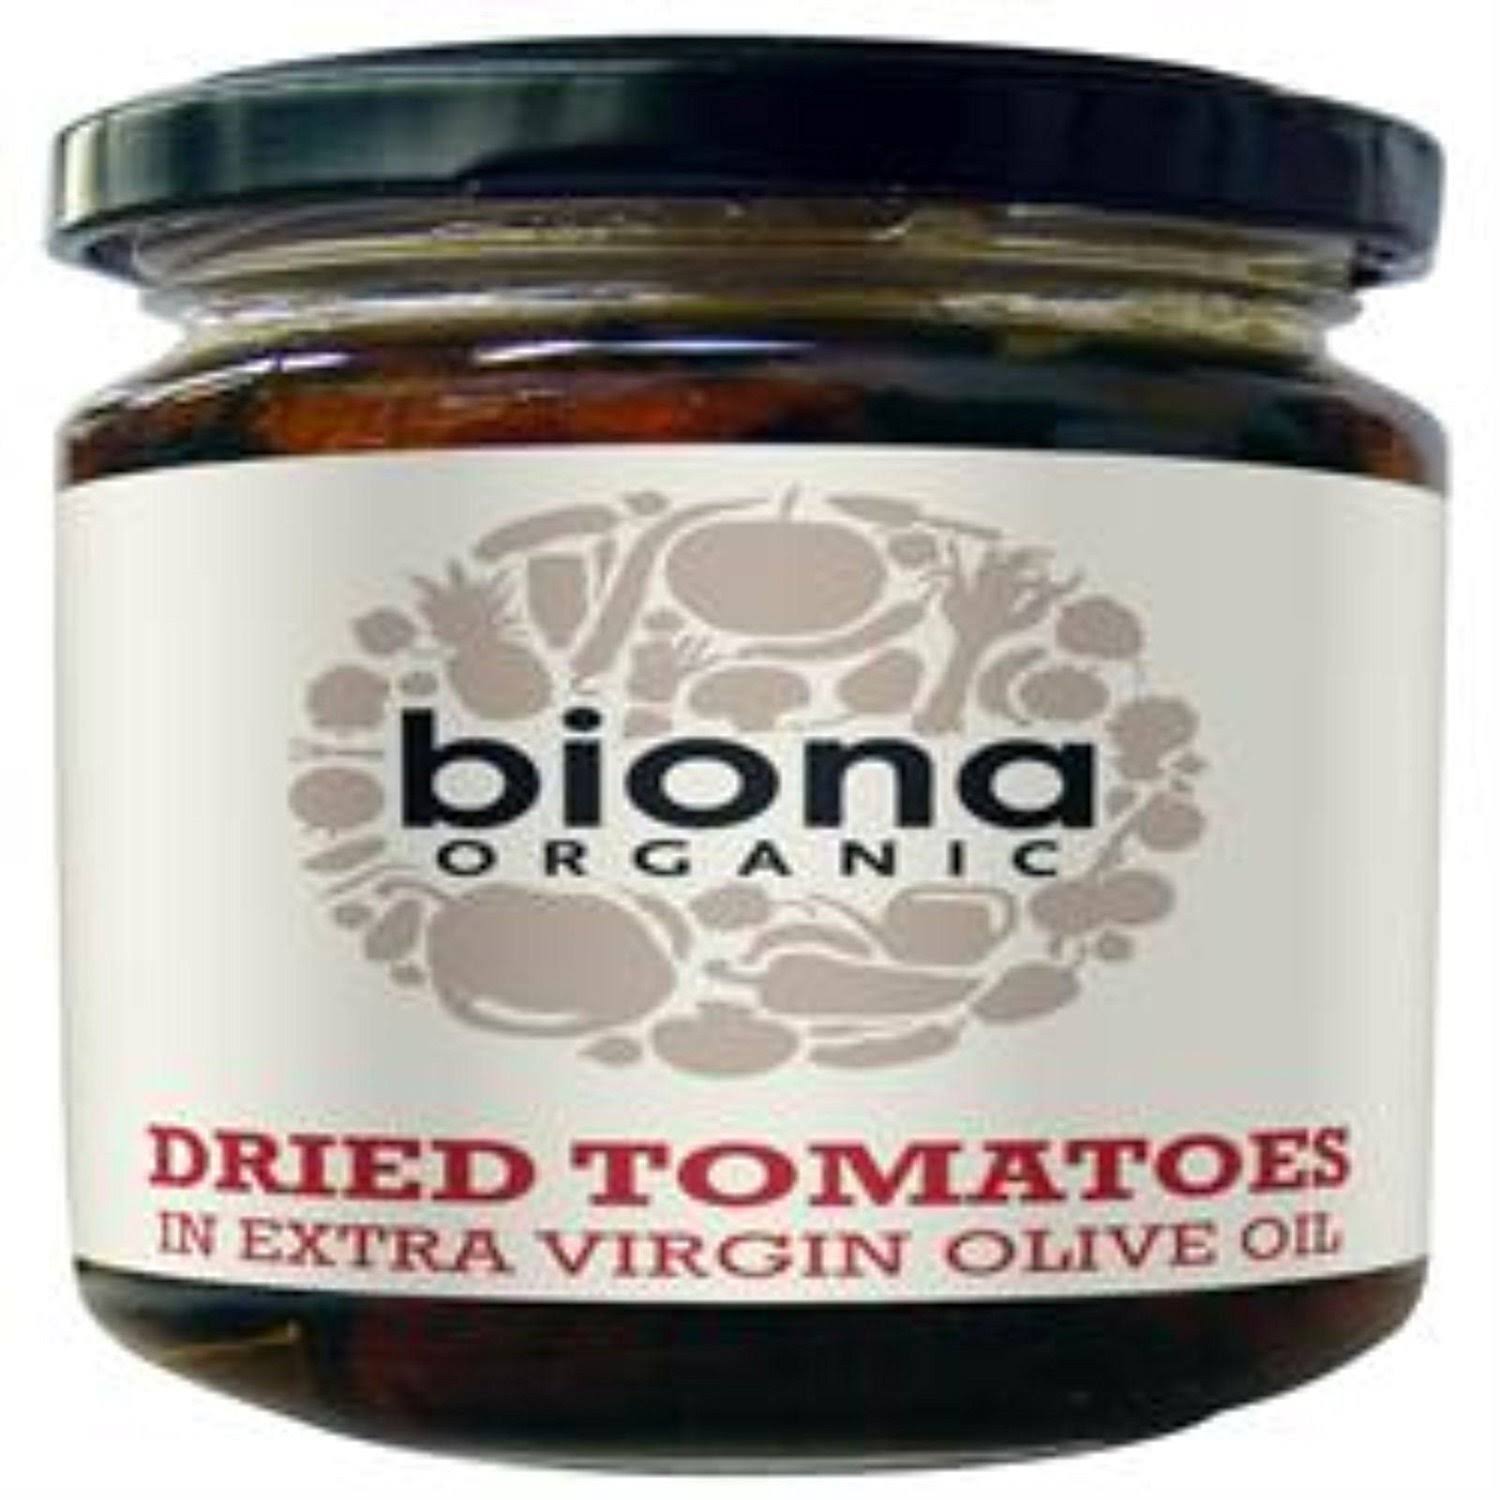 Biona Organic Dried Tomatoes in Extra Virgin Olive Oil 170g